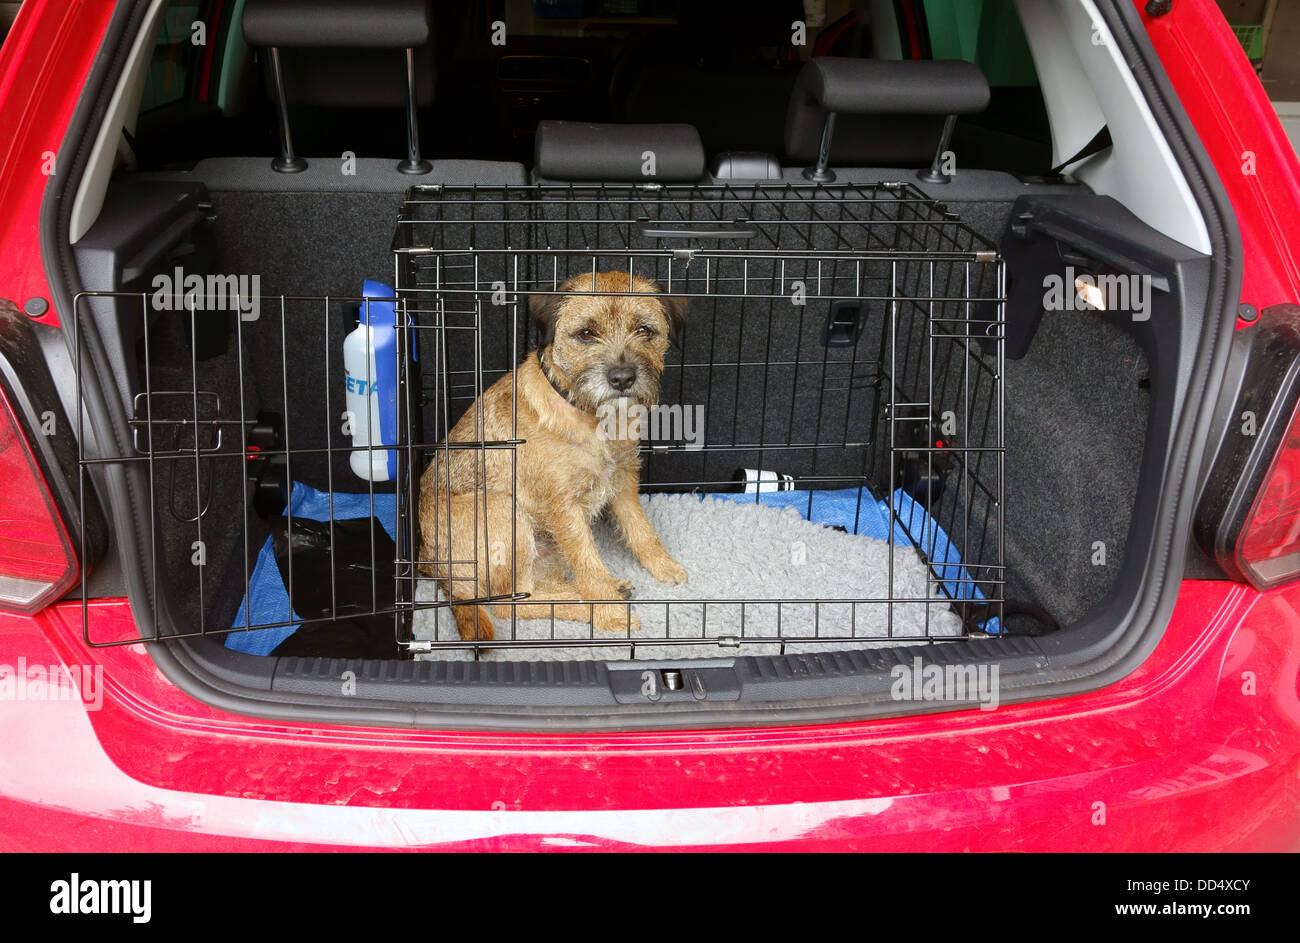 dog cage boot car